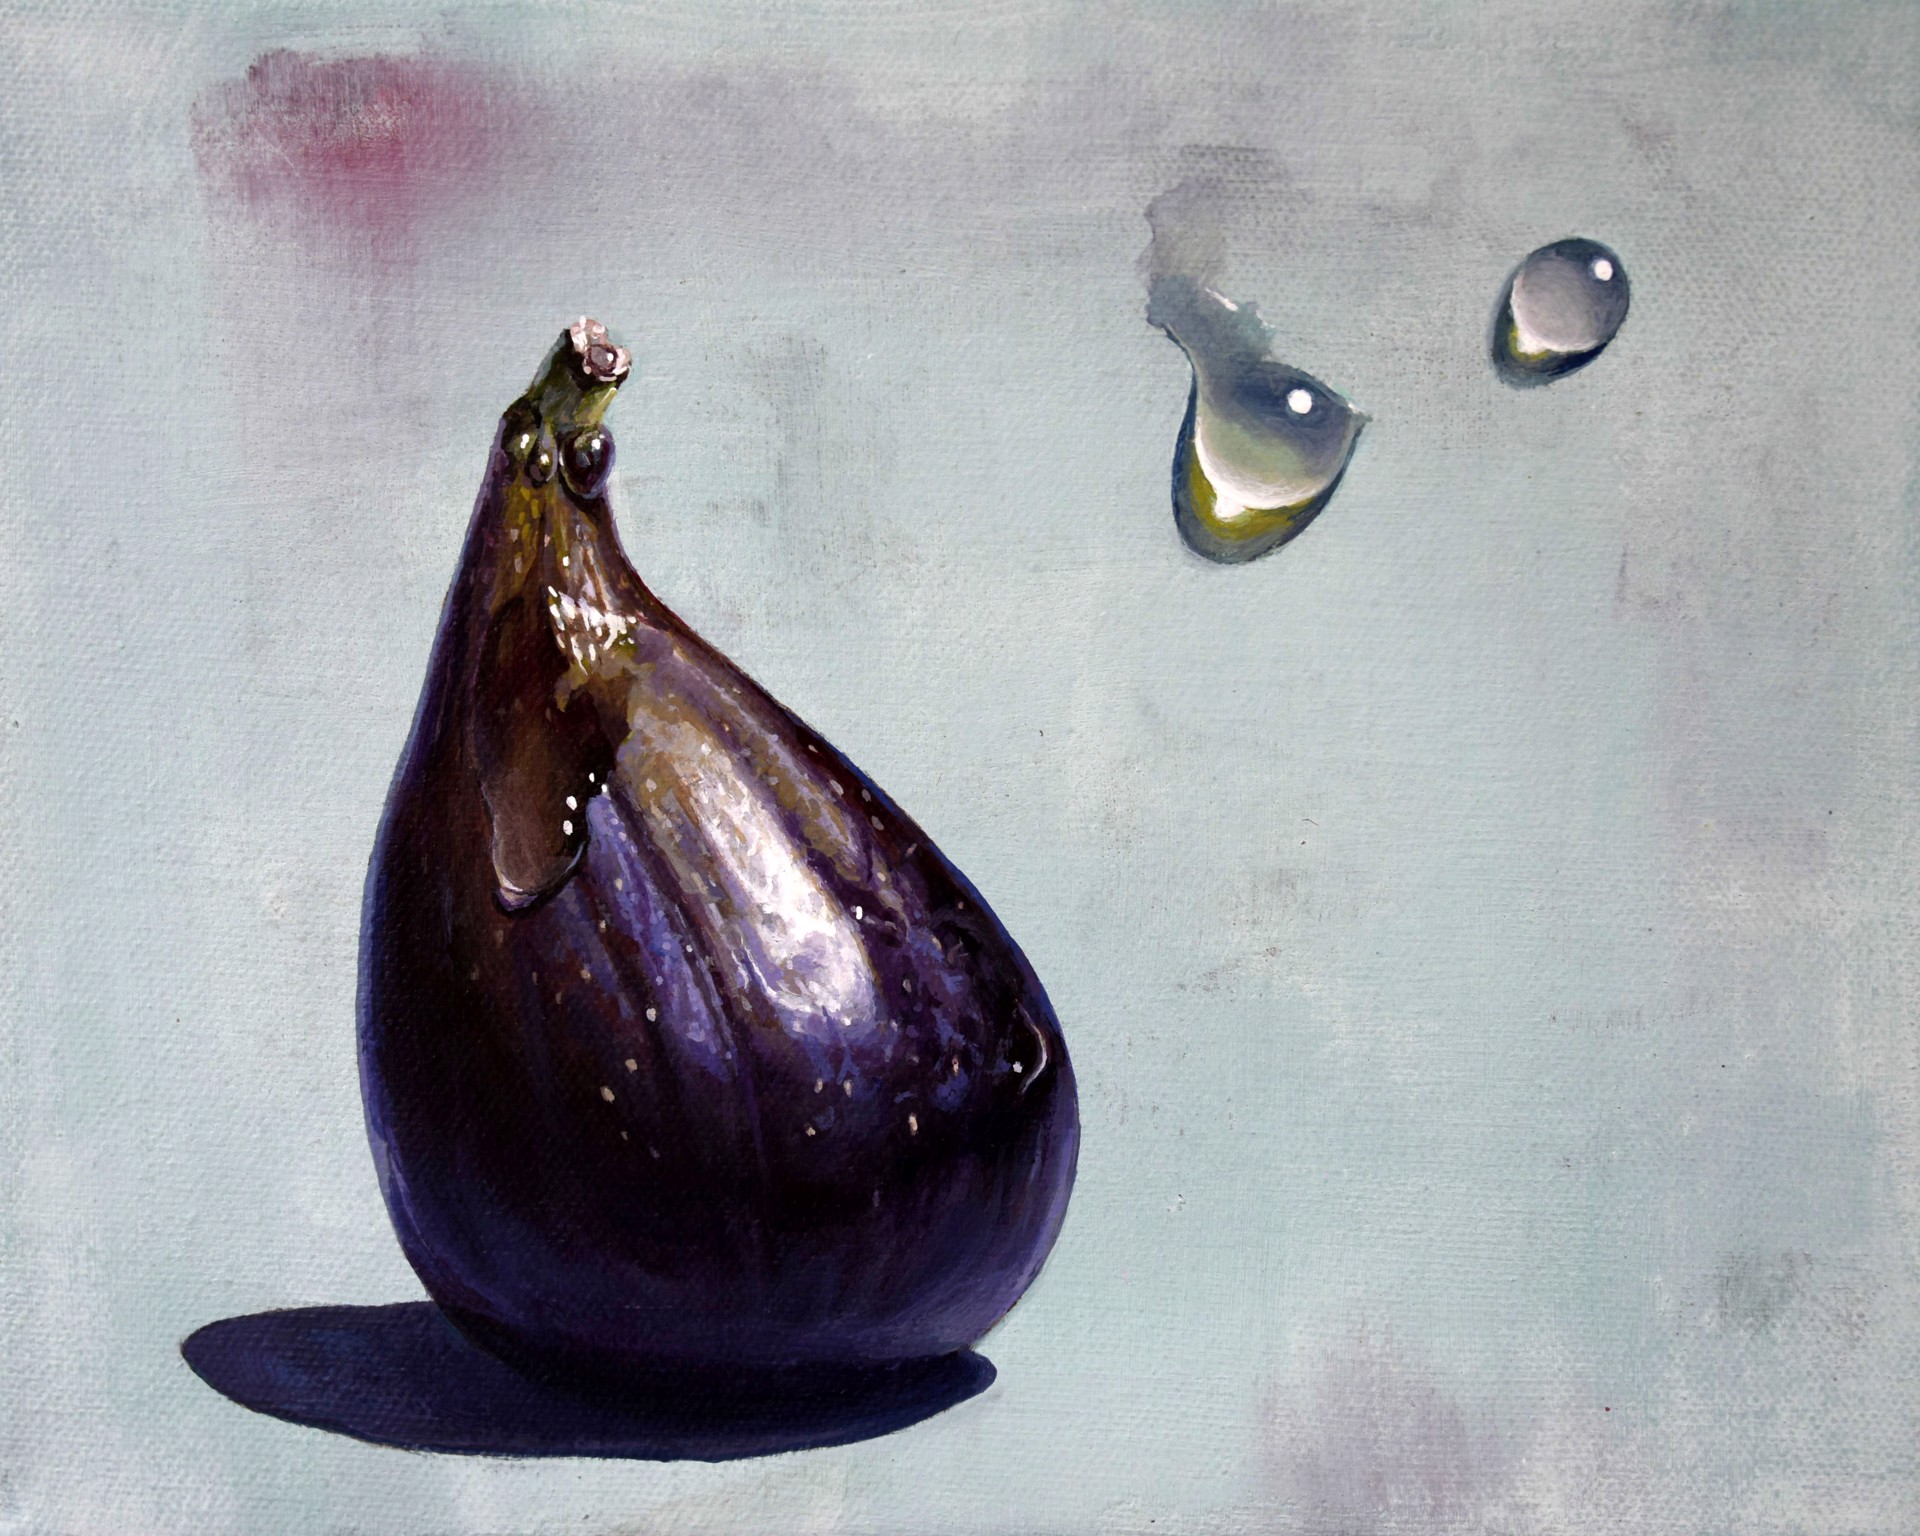 A Fig and Water Drops by Paul Art Lee